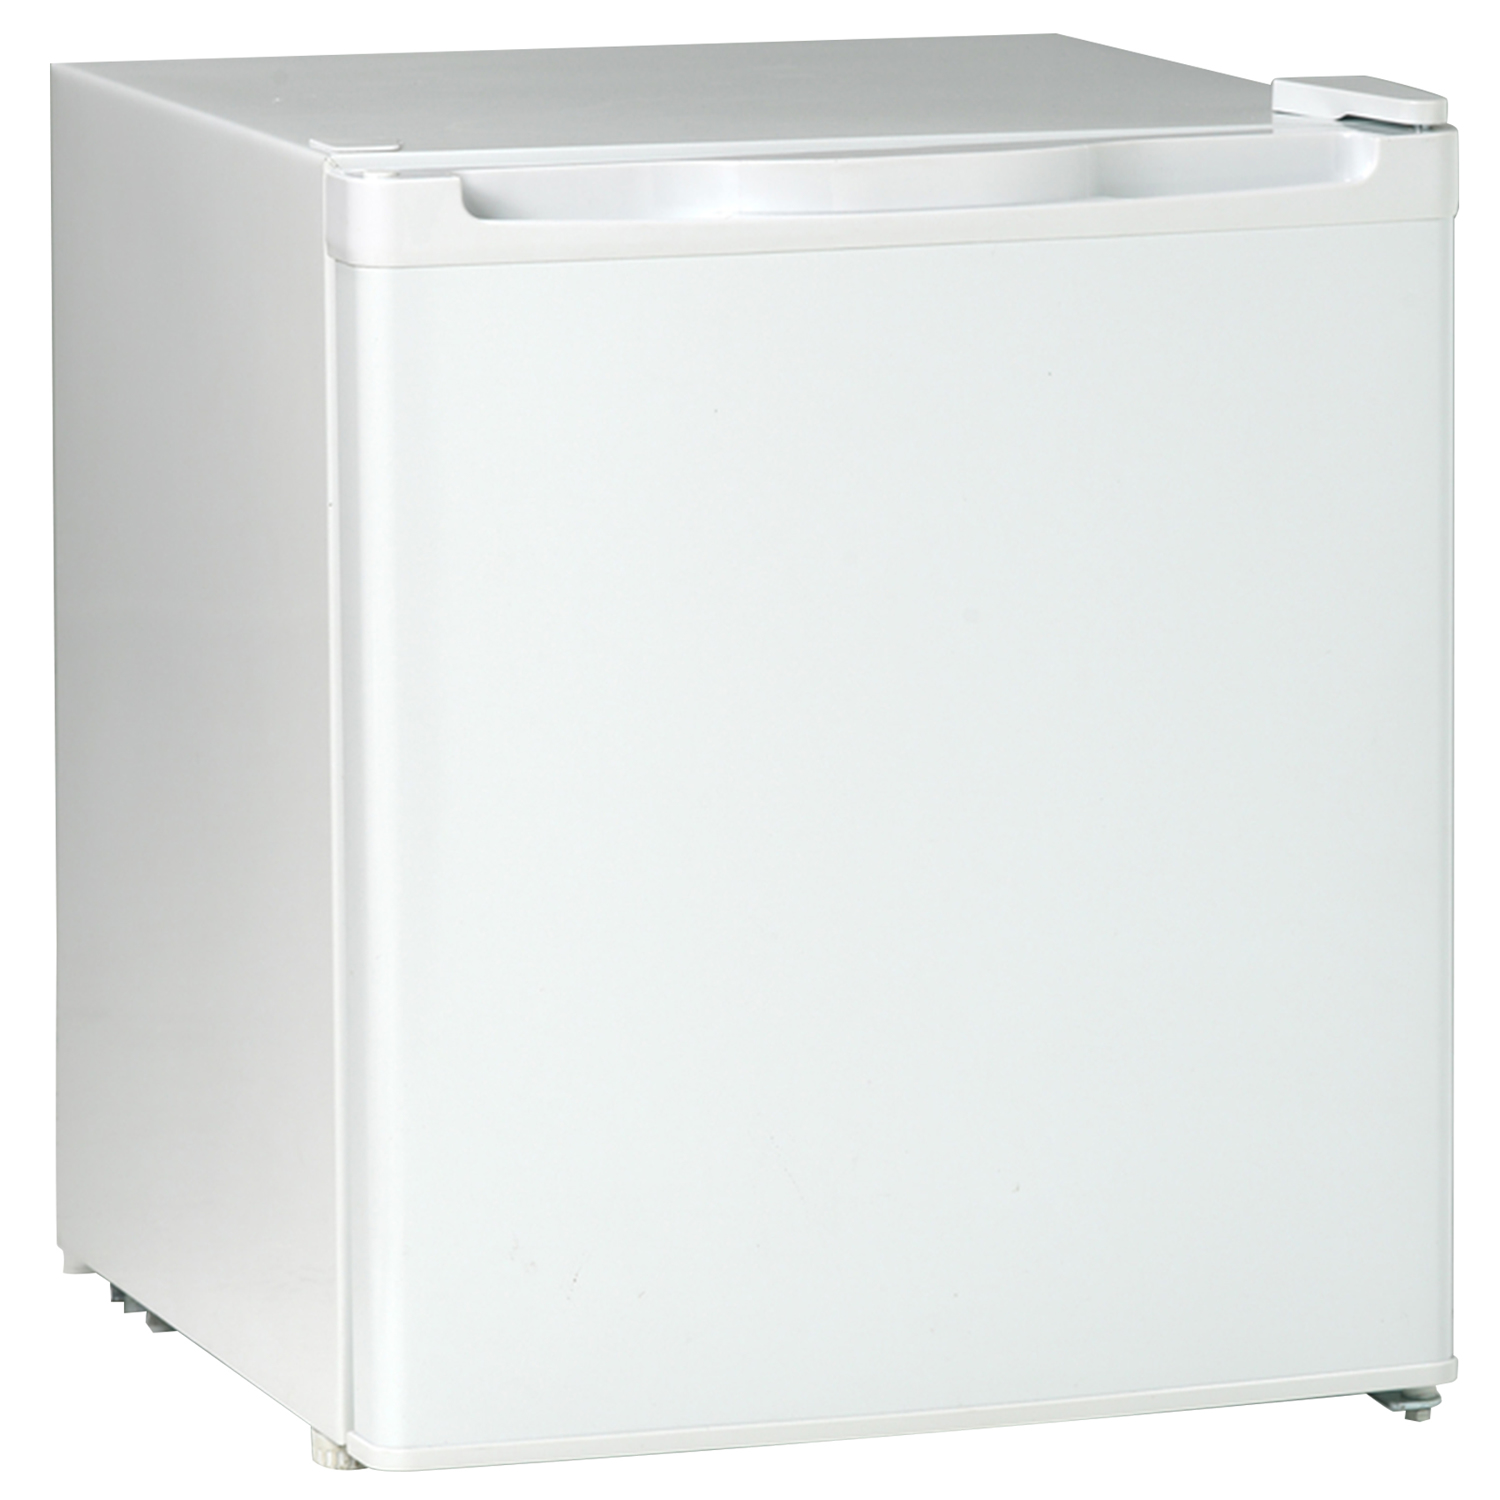 Photos - Other interior and decor Avanti 1.7 cu ft White Steel Compact Refrigerator 120 W RM16J0W 